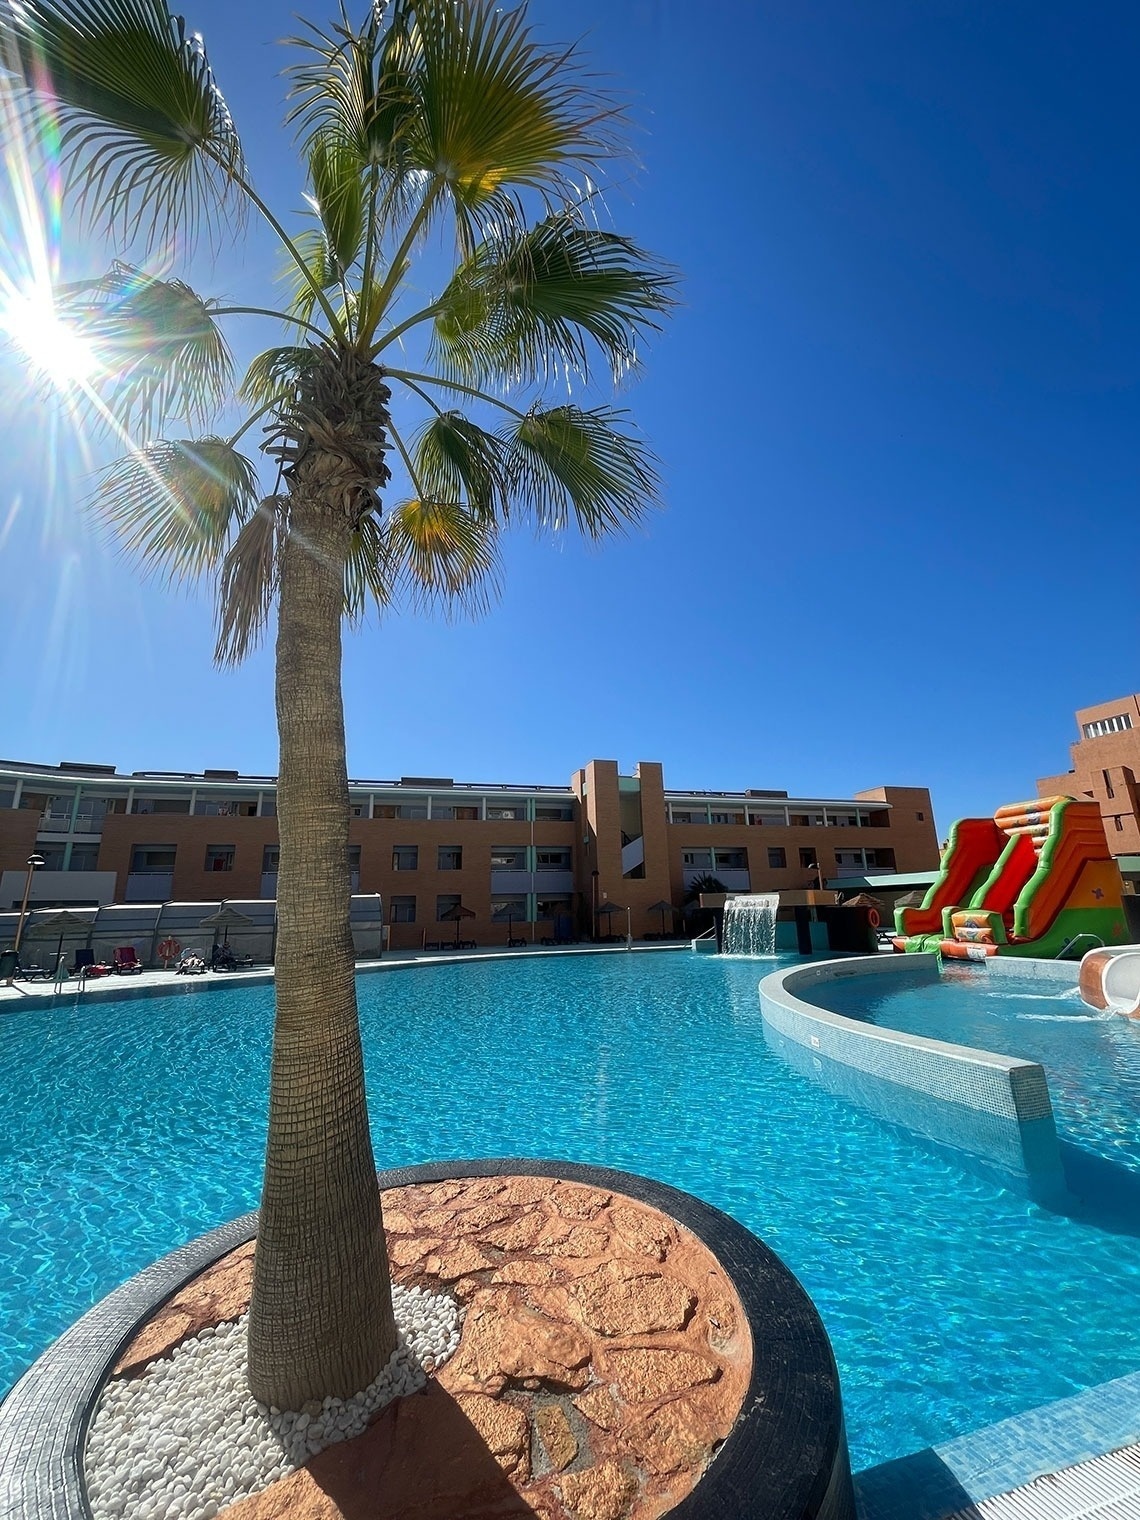 a large swimming pool with a palm tree in the foreground